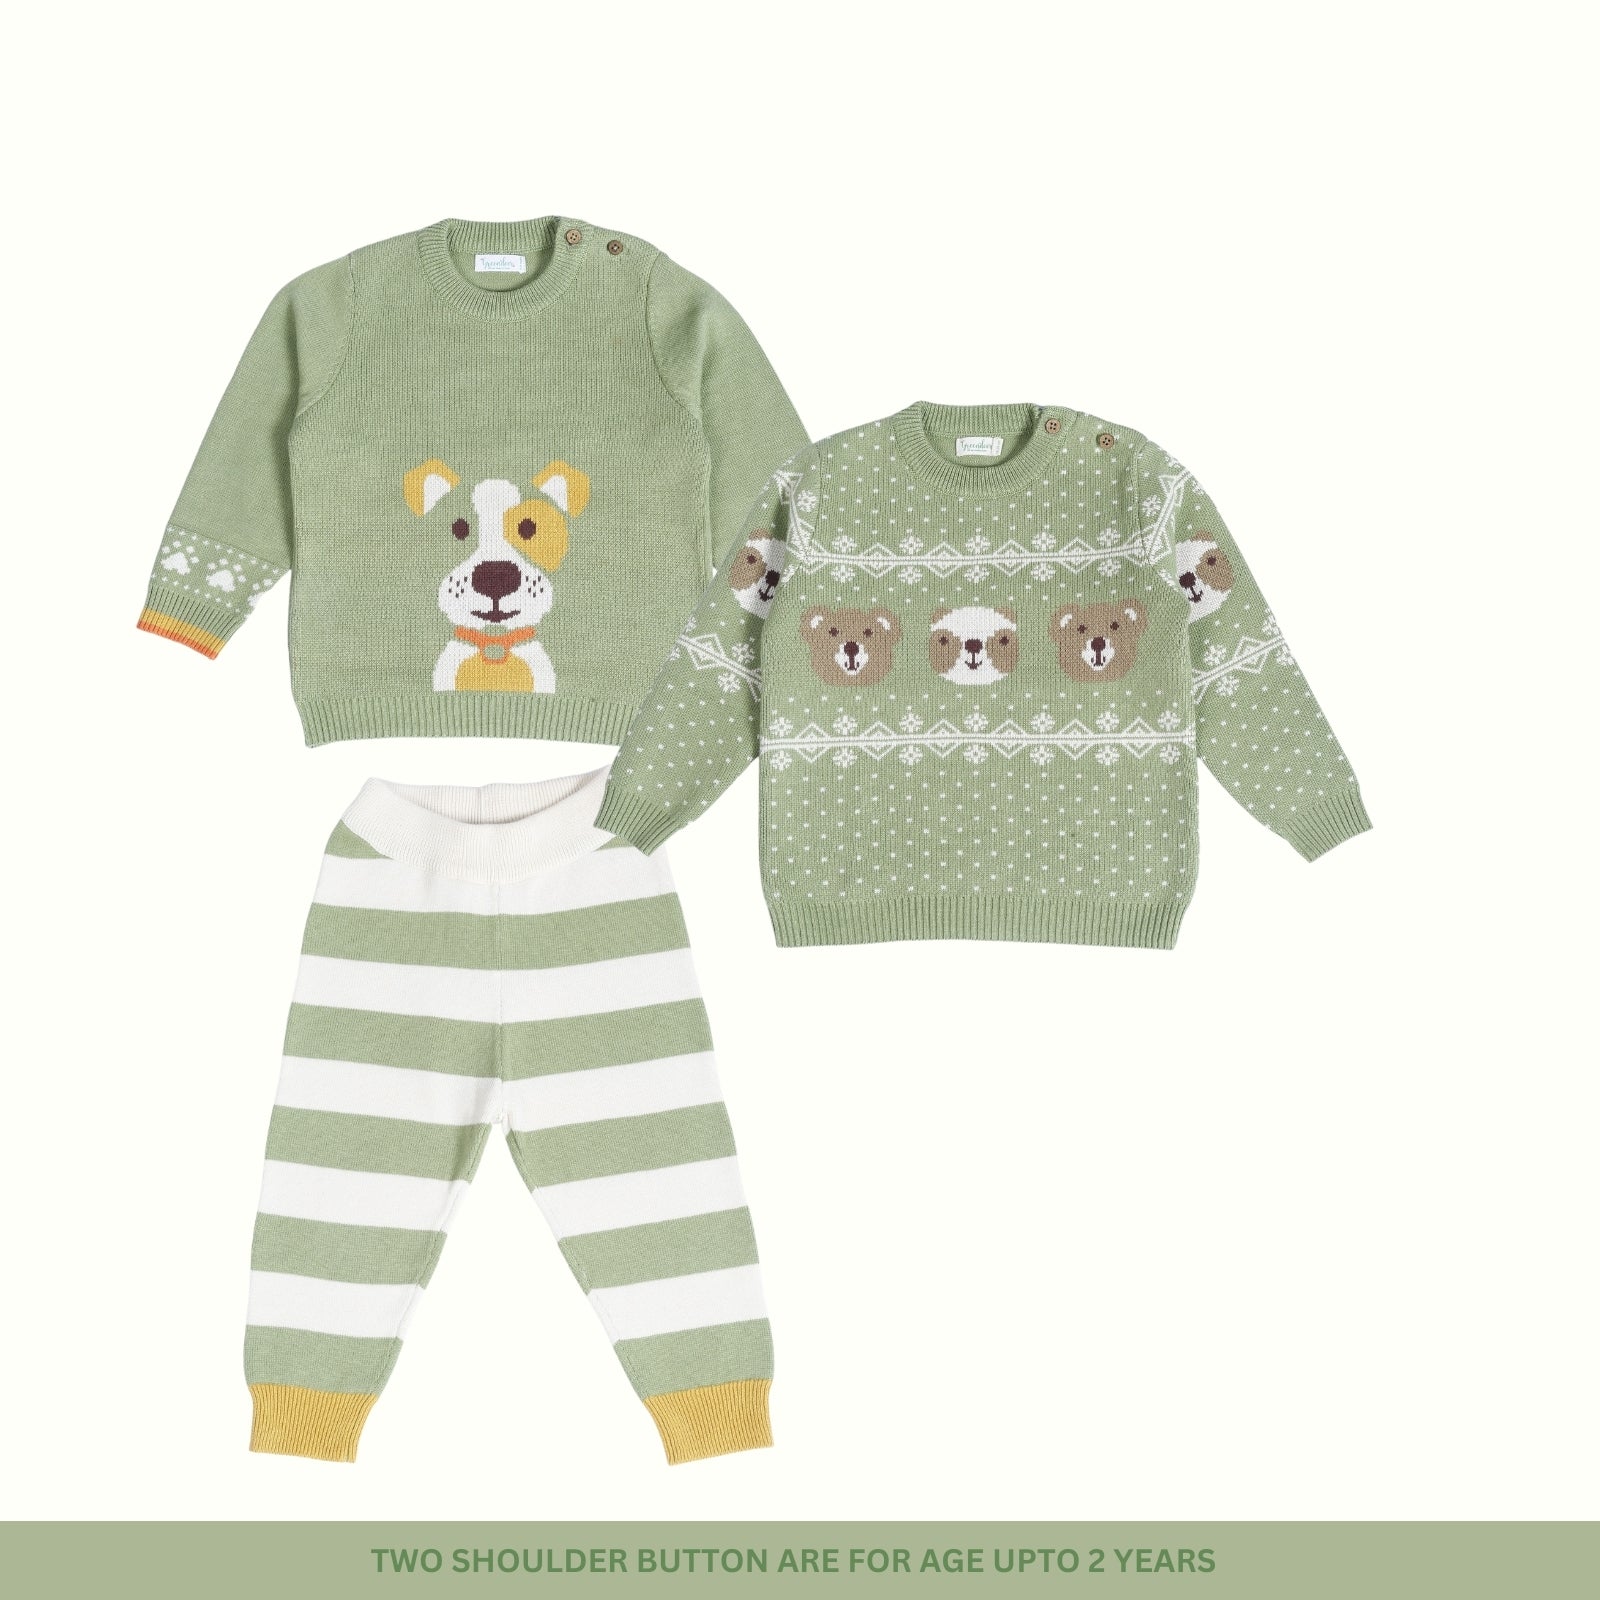 Greendeer Cheerful Dog & Enchanting Bear 100% Cotton Sweater with Lower Set of 3